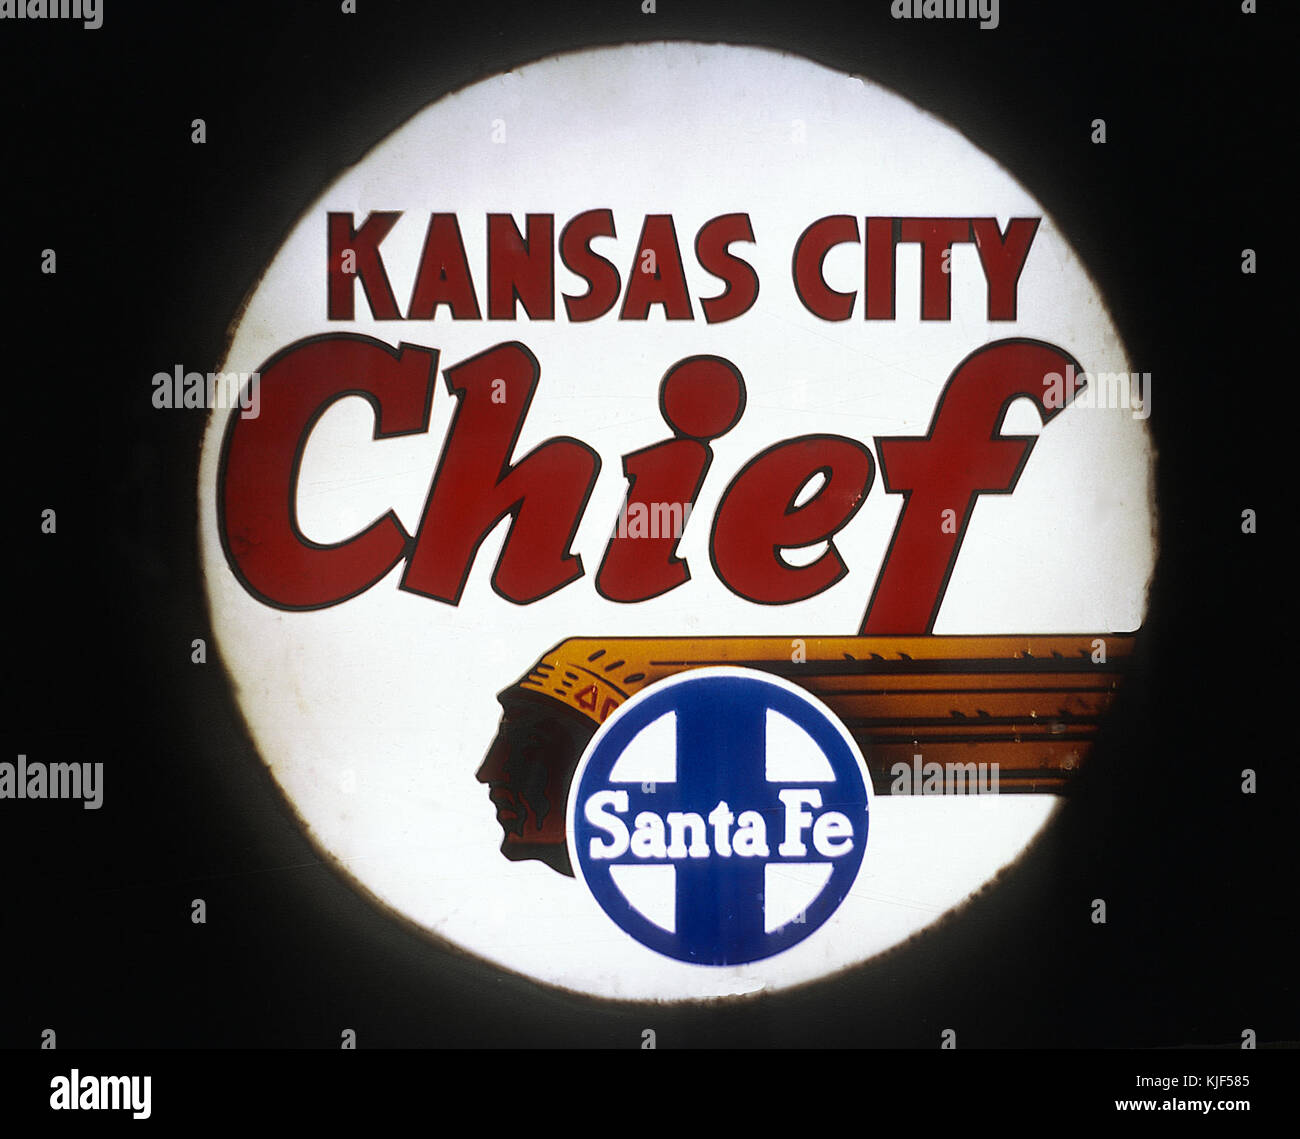 The Kansas City Chief drumhead, Dearborn Station, Chicago, IL on February 5, 1968 (24054006236) Stock Photo